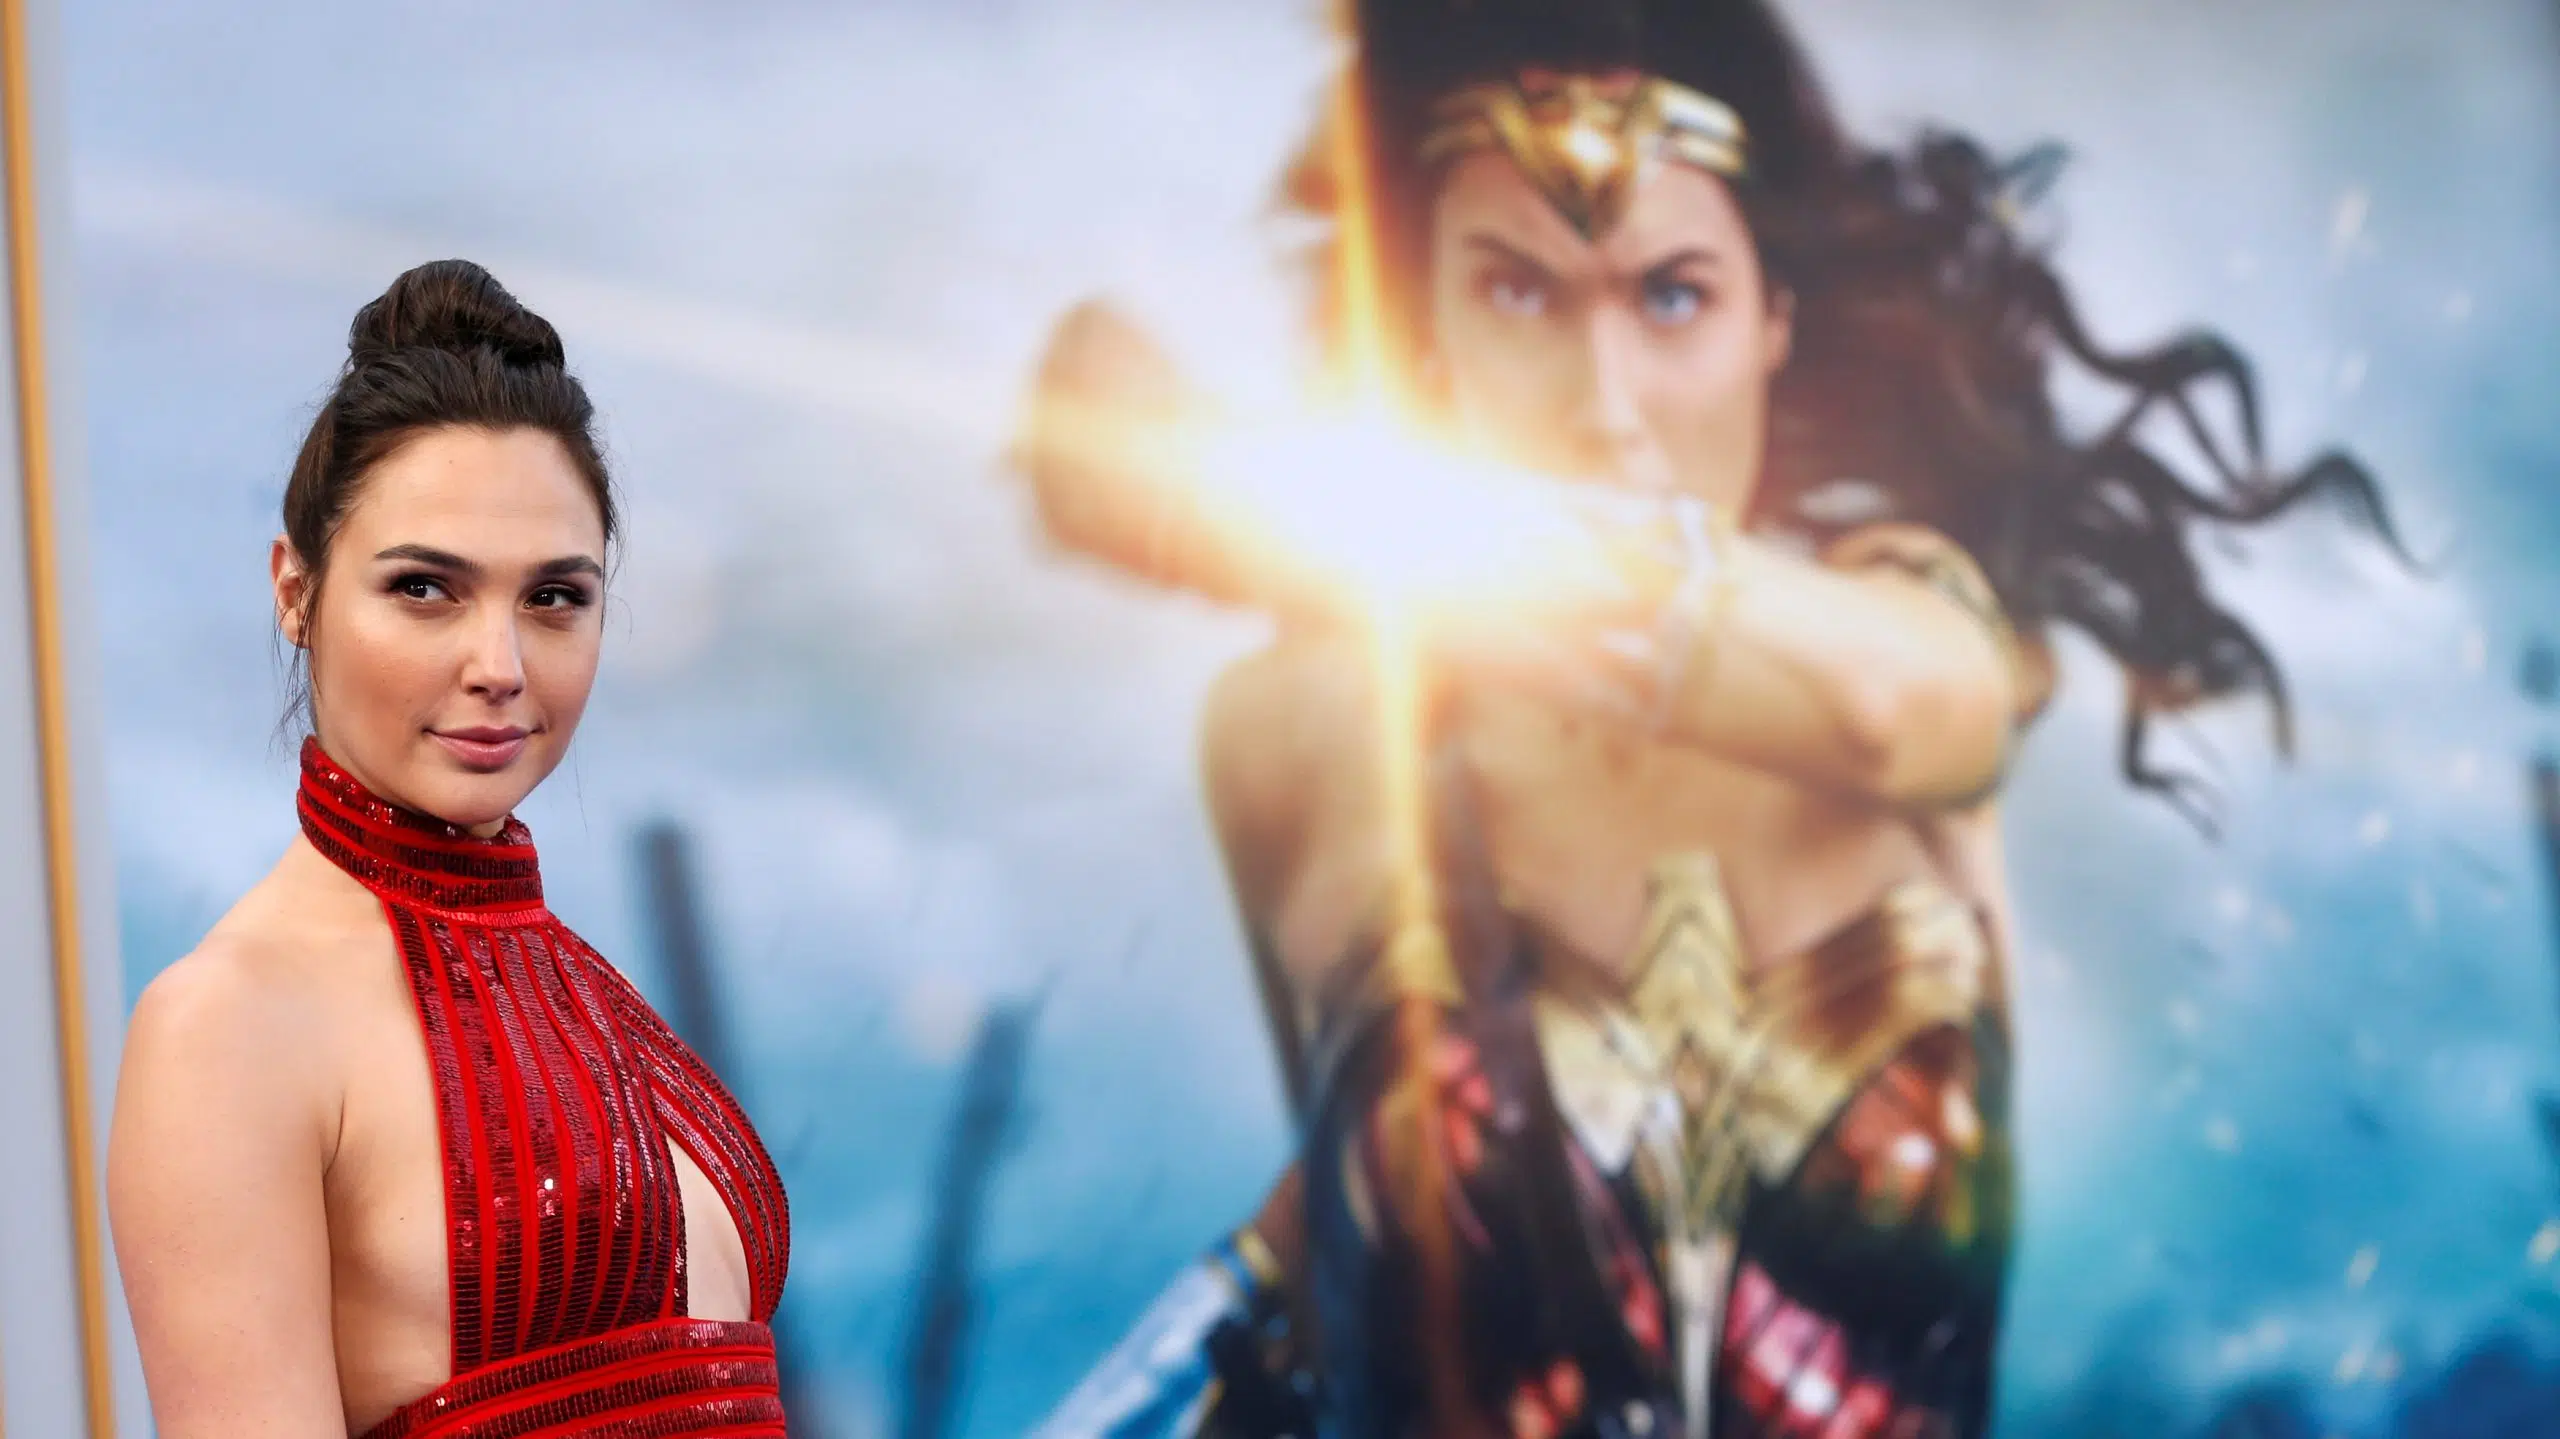 Wonder Woman 3: release date, cast and what is known about the film